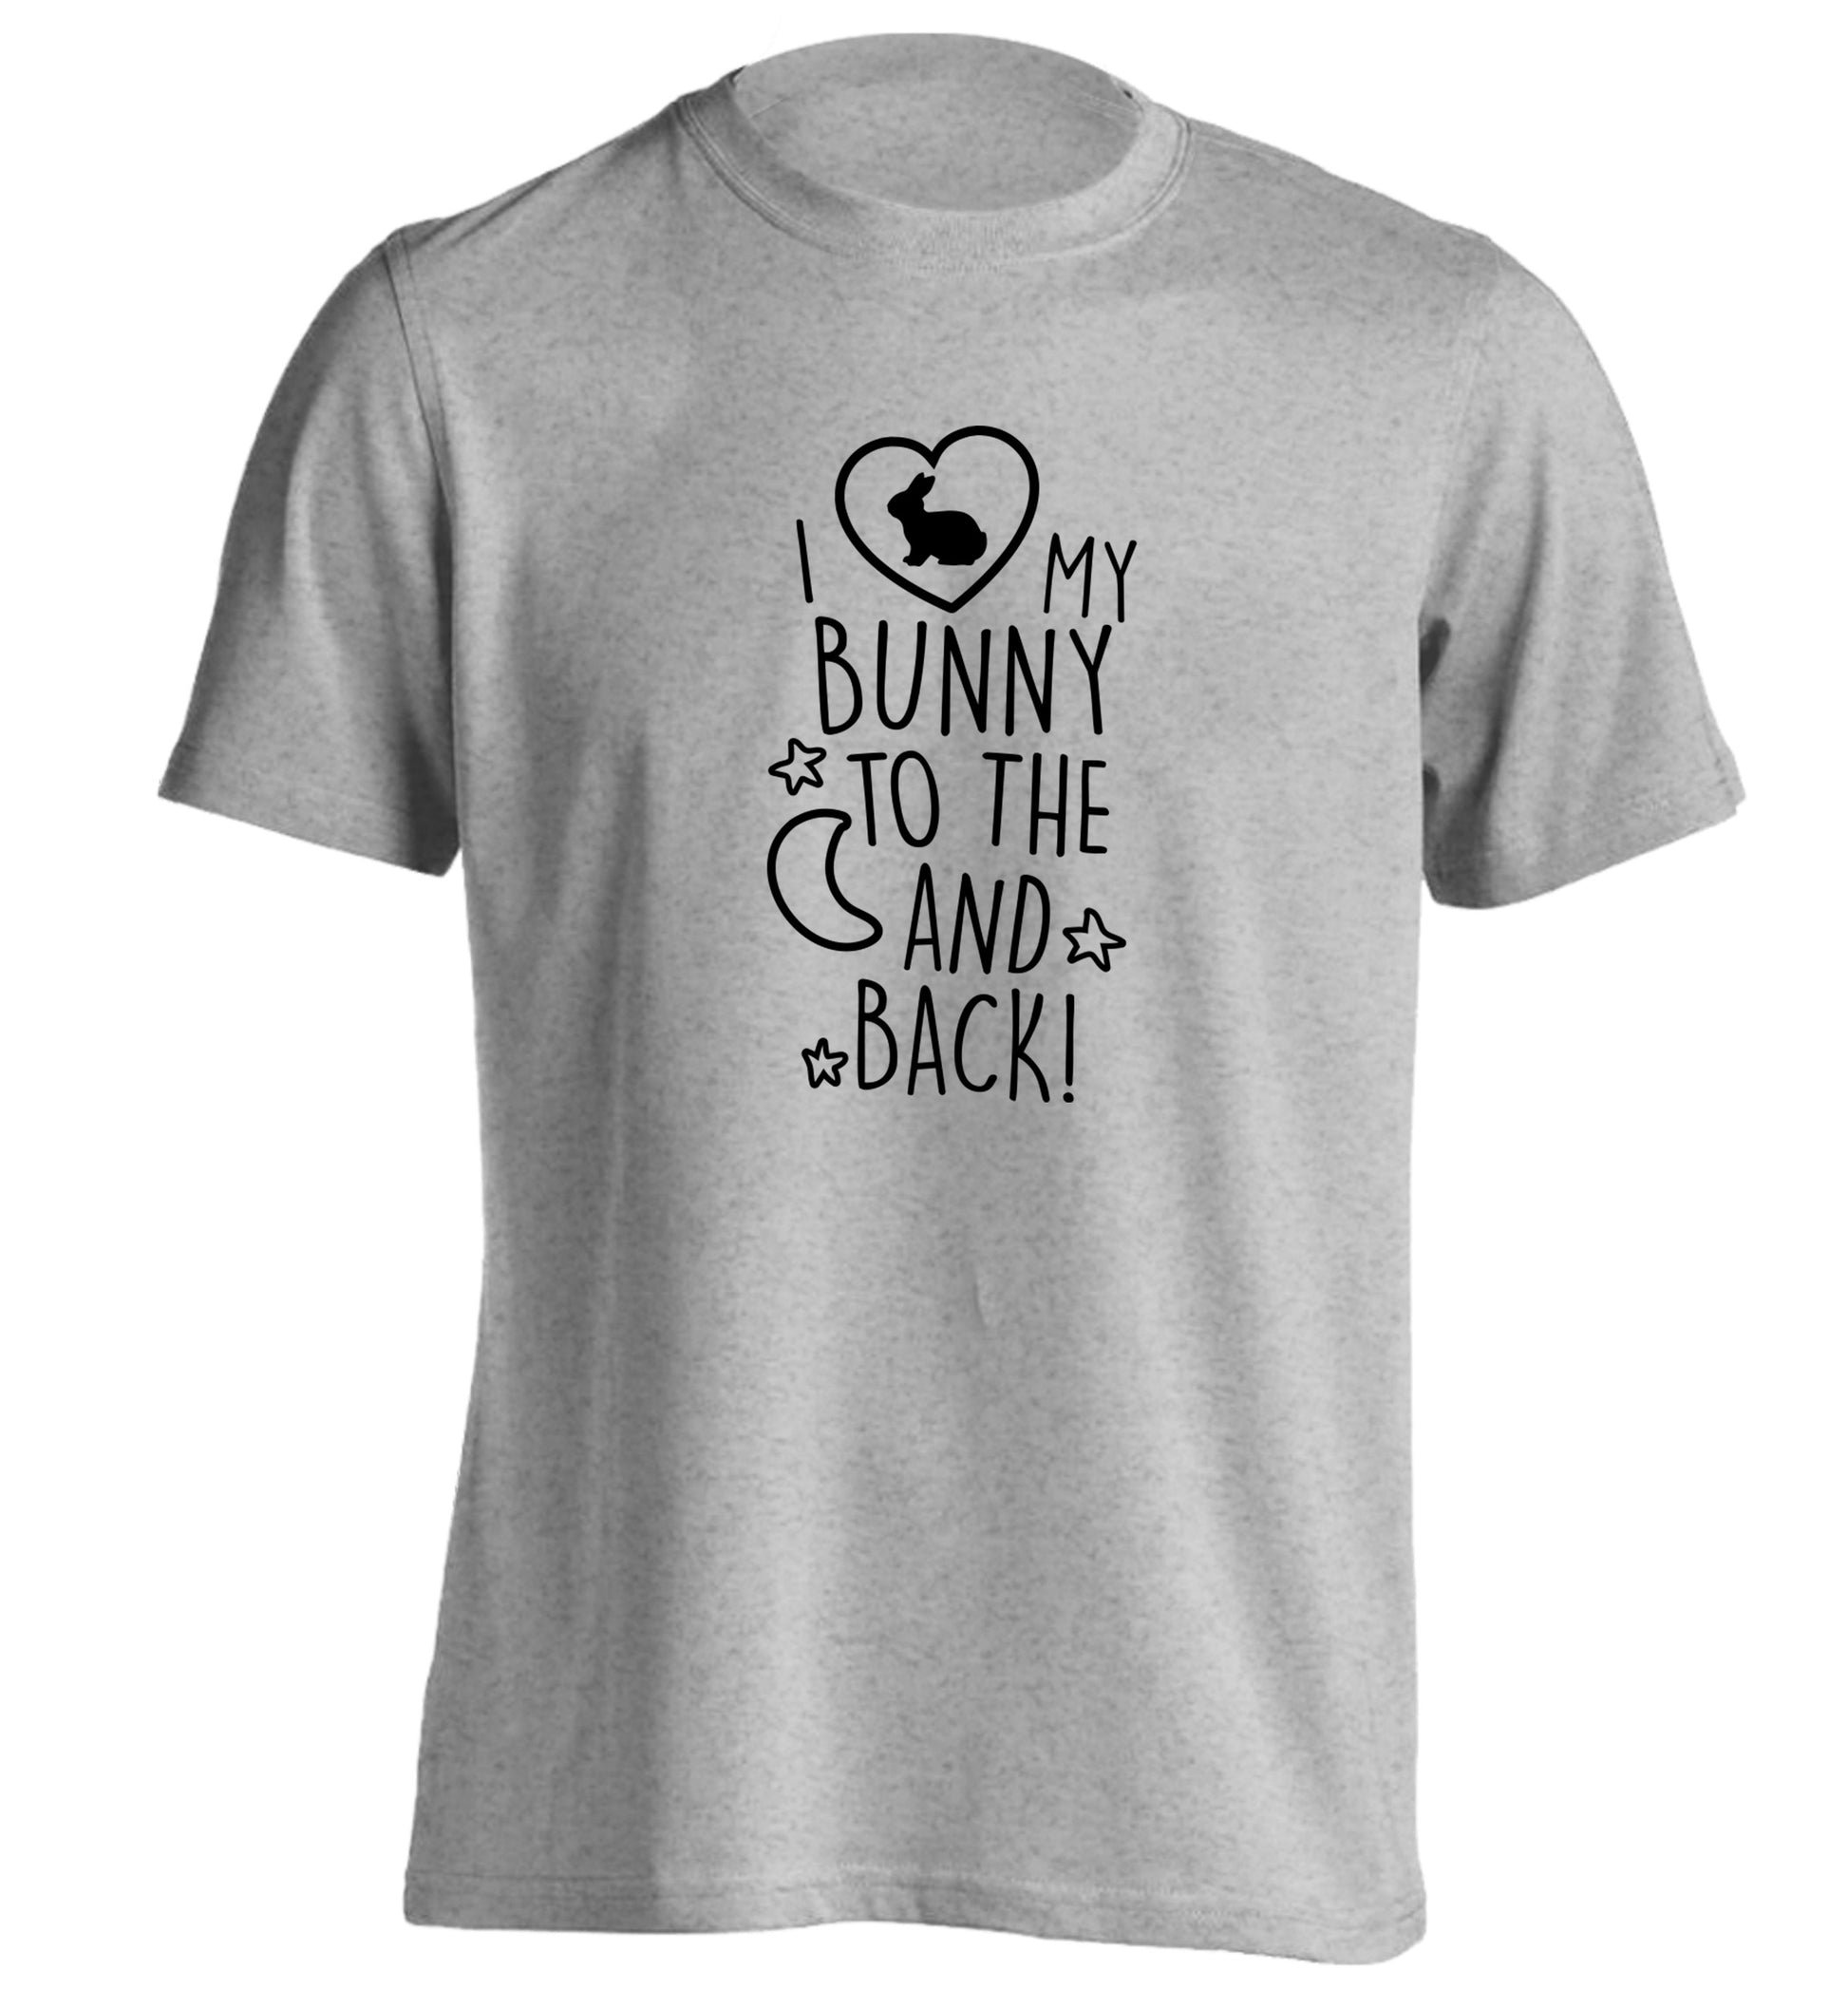 I love my bunny to the moon and back adults unisex grey Tshirt 2XL